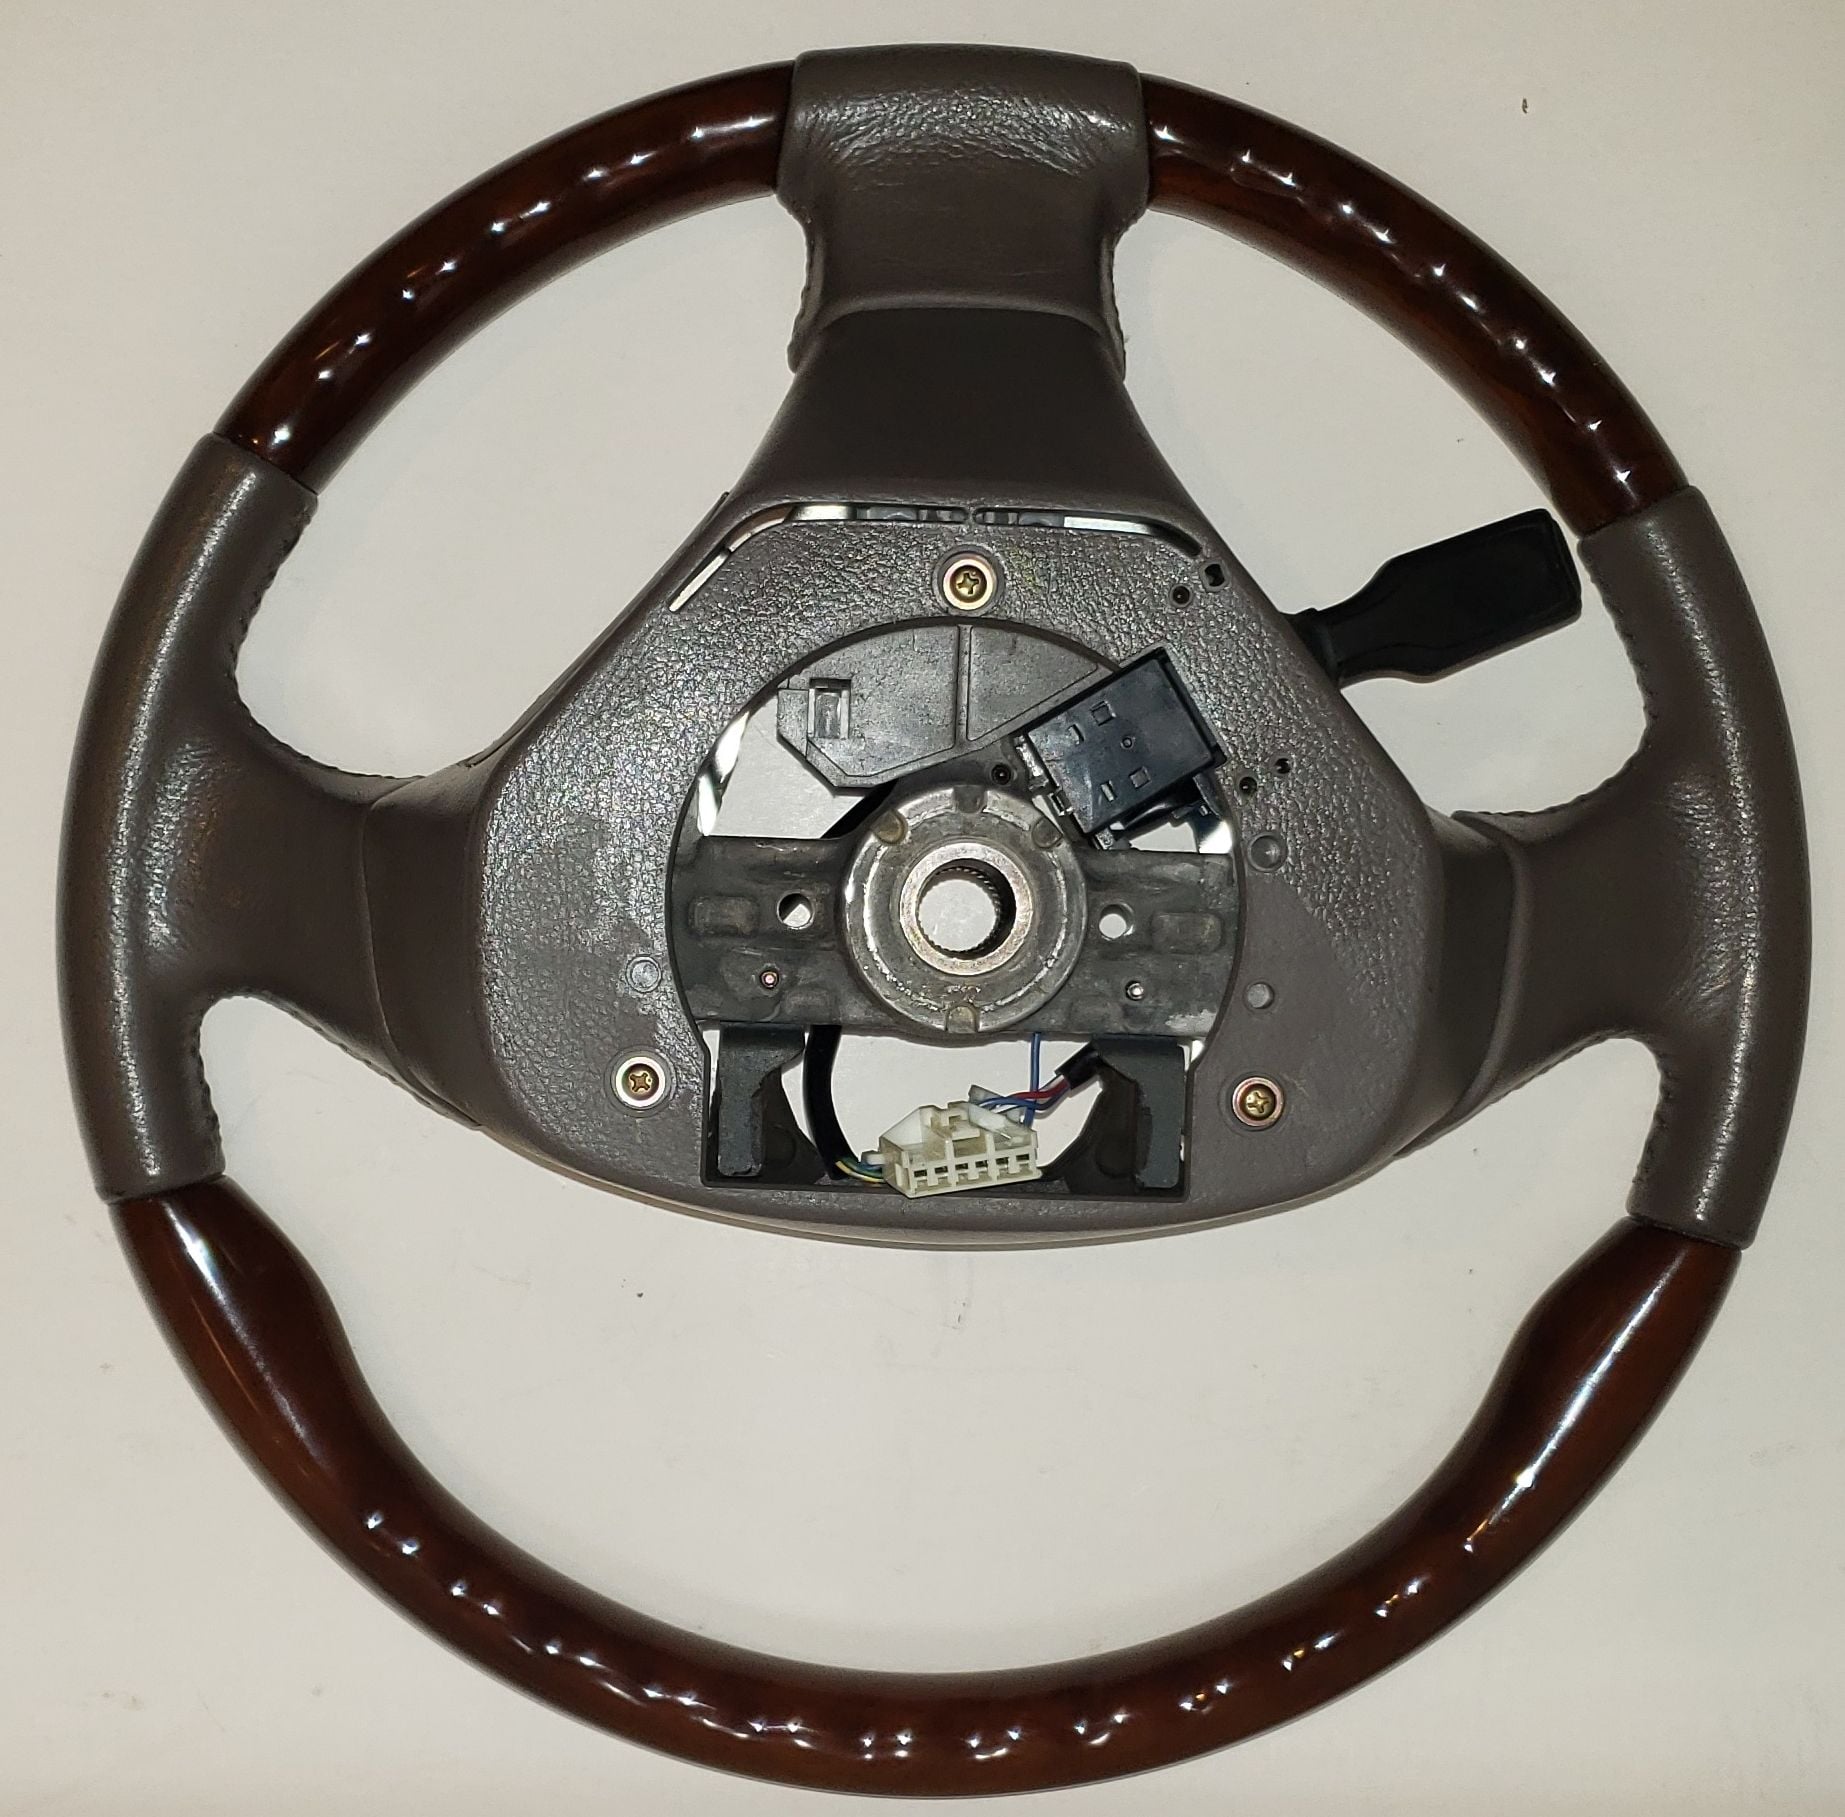 Interior/Upholstery - 2002 Lexus RX300 Streering Wheel - Wood & Leather - Used - 1999 to 2003 Lexus RX300 - 1998 to 2005 Lexus GS300 - 1998 to 2000 Lexus GS400 - 2001 to 2005 Lexus GS430 - Raleigh, NC 27612, United States